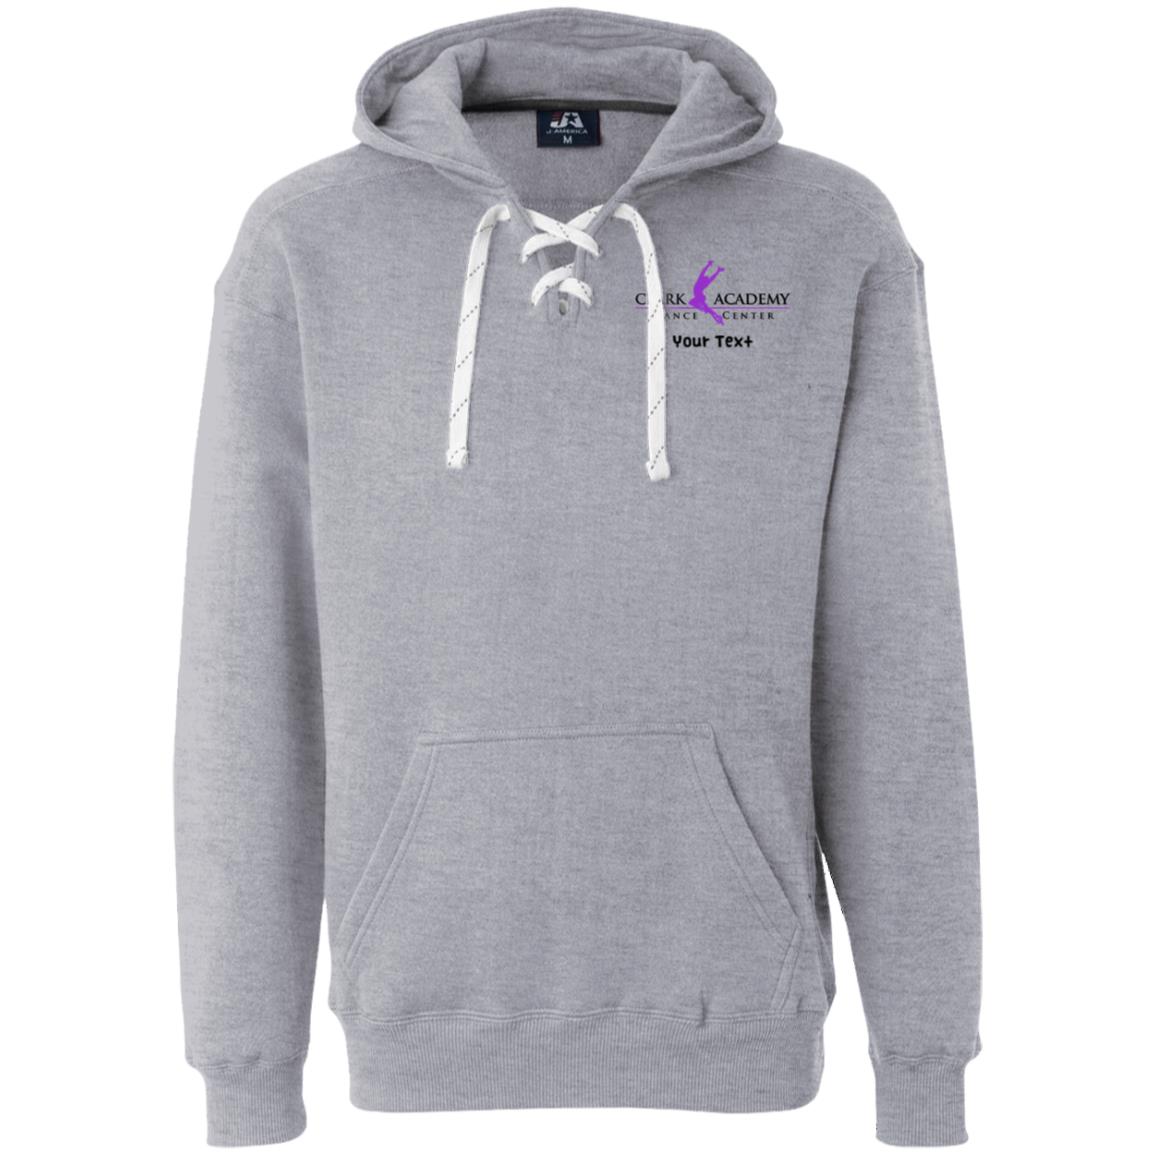 CADC Heavyweight Sport Lace Hoodie - With Personalization